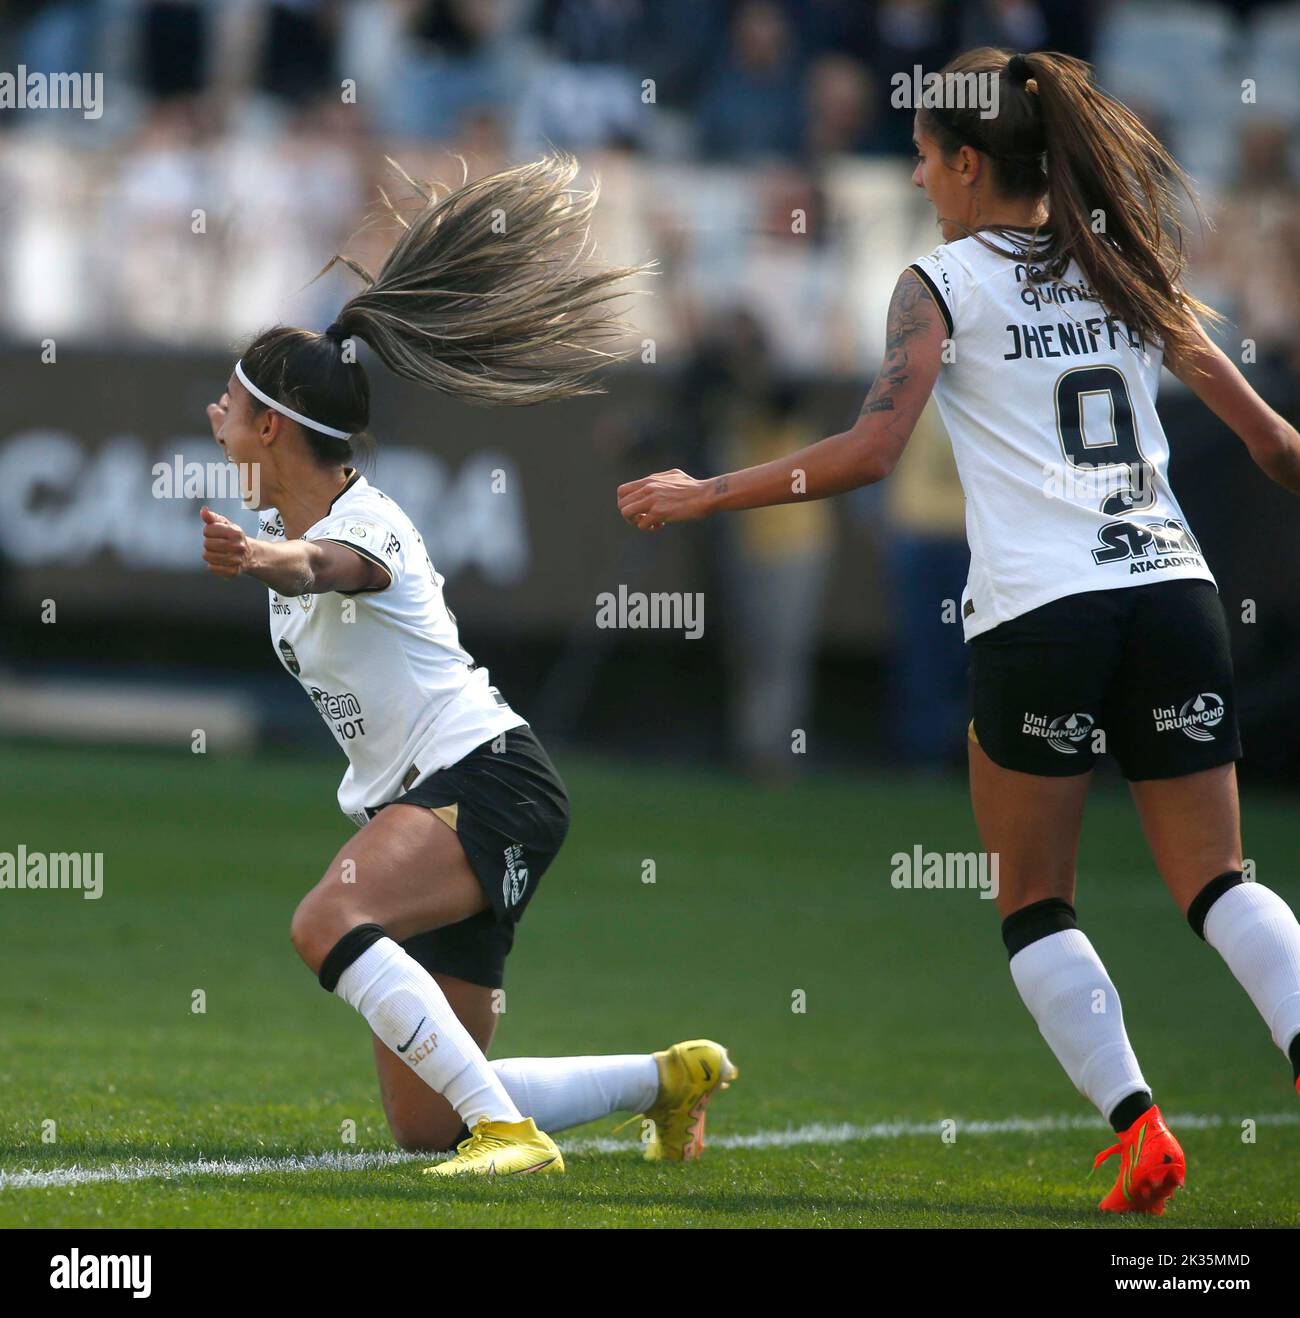 Sao Paulo, Brazil. 24th Sep, 2022. Diany during a game between Corinthians and Internacional at the Neo Quimica Arena in Sao Paulo, Brazil, fernando roberto/spp (Fernando Roberto/SPP) Credit: SPP Sport Press Photo. /Alamy Live News Stock Photo